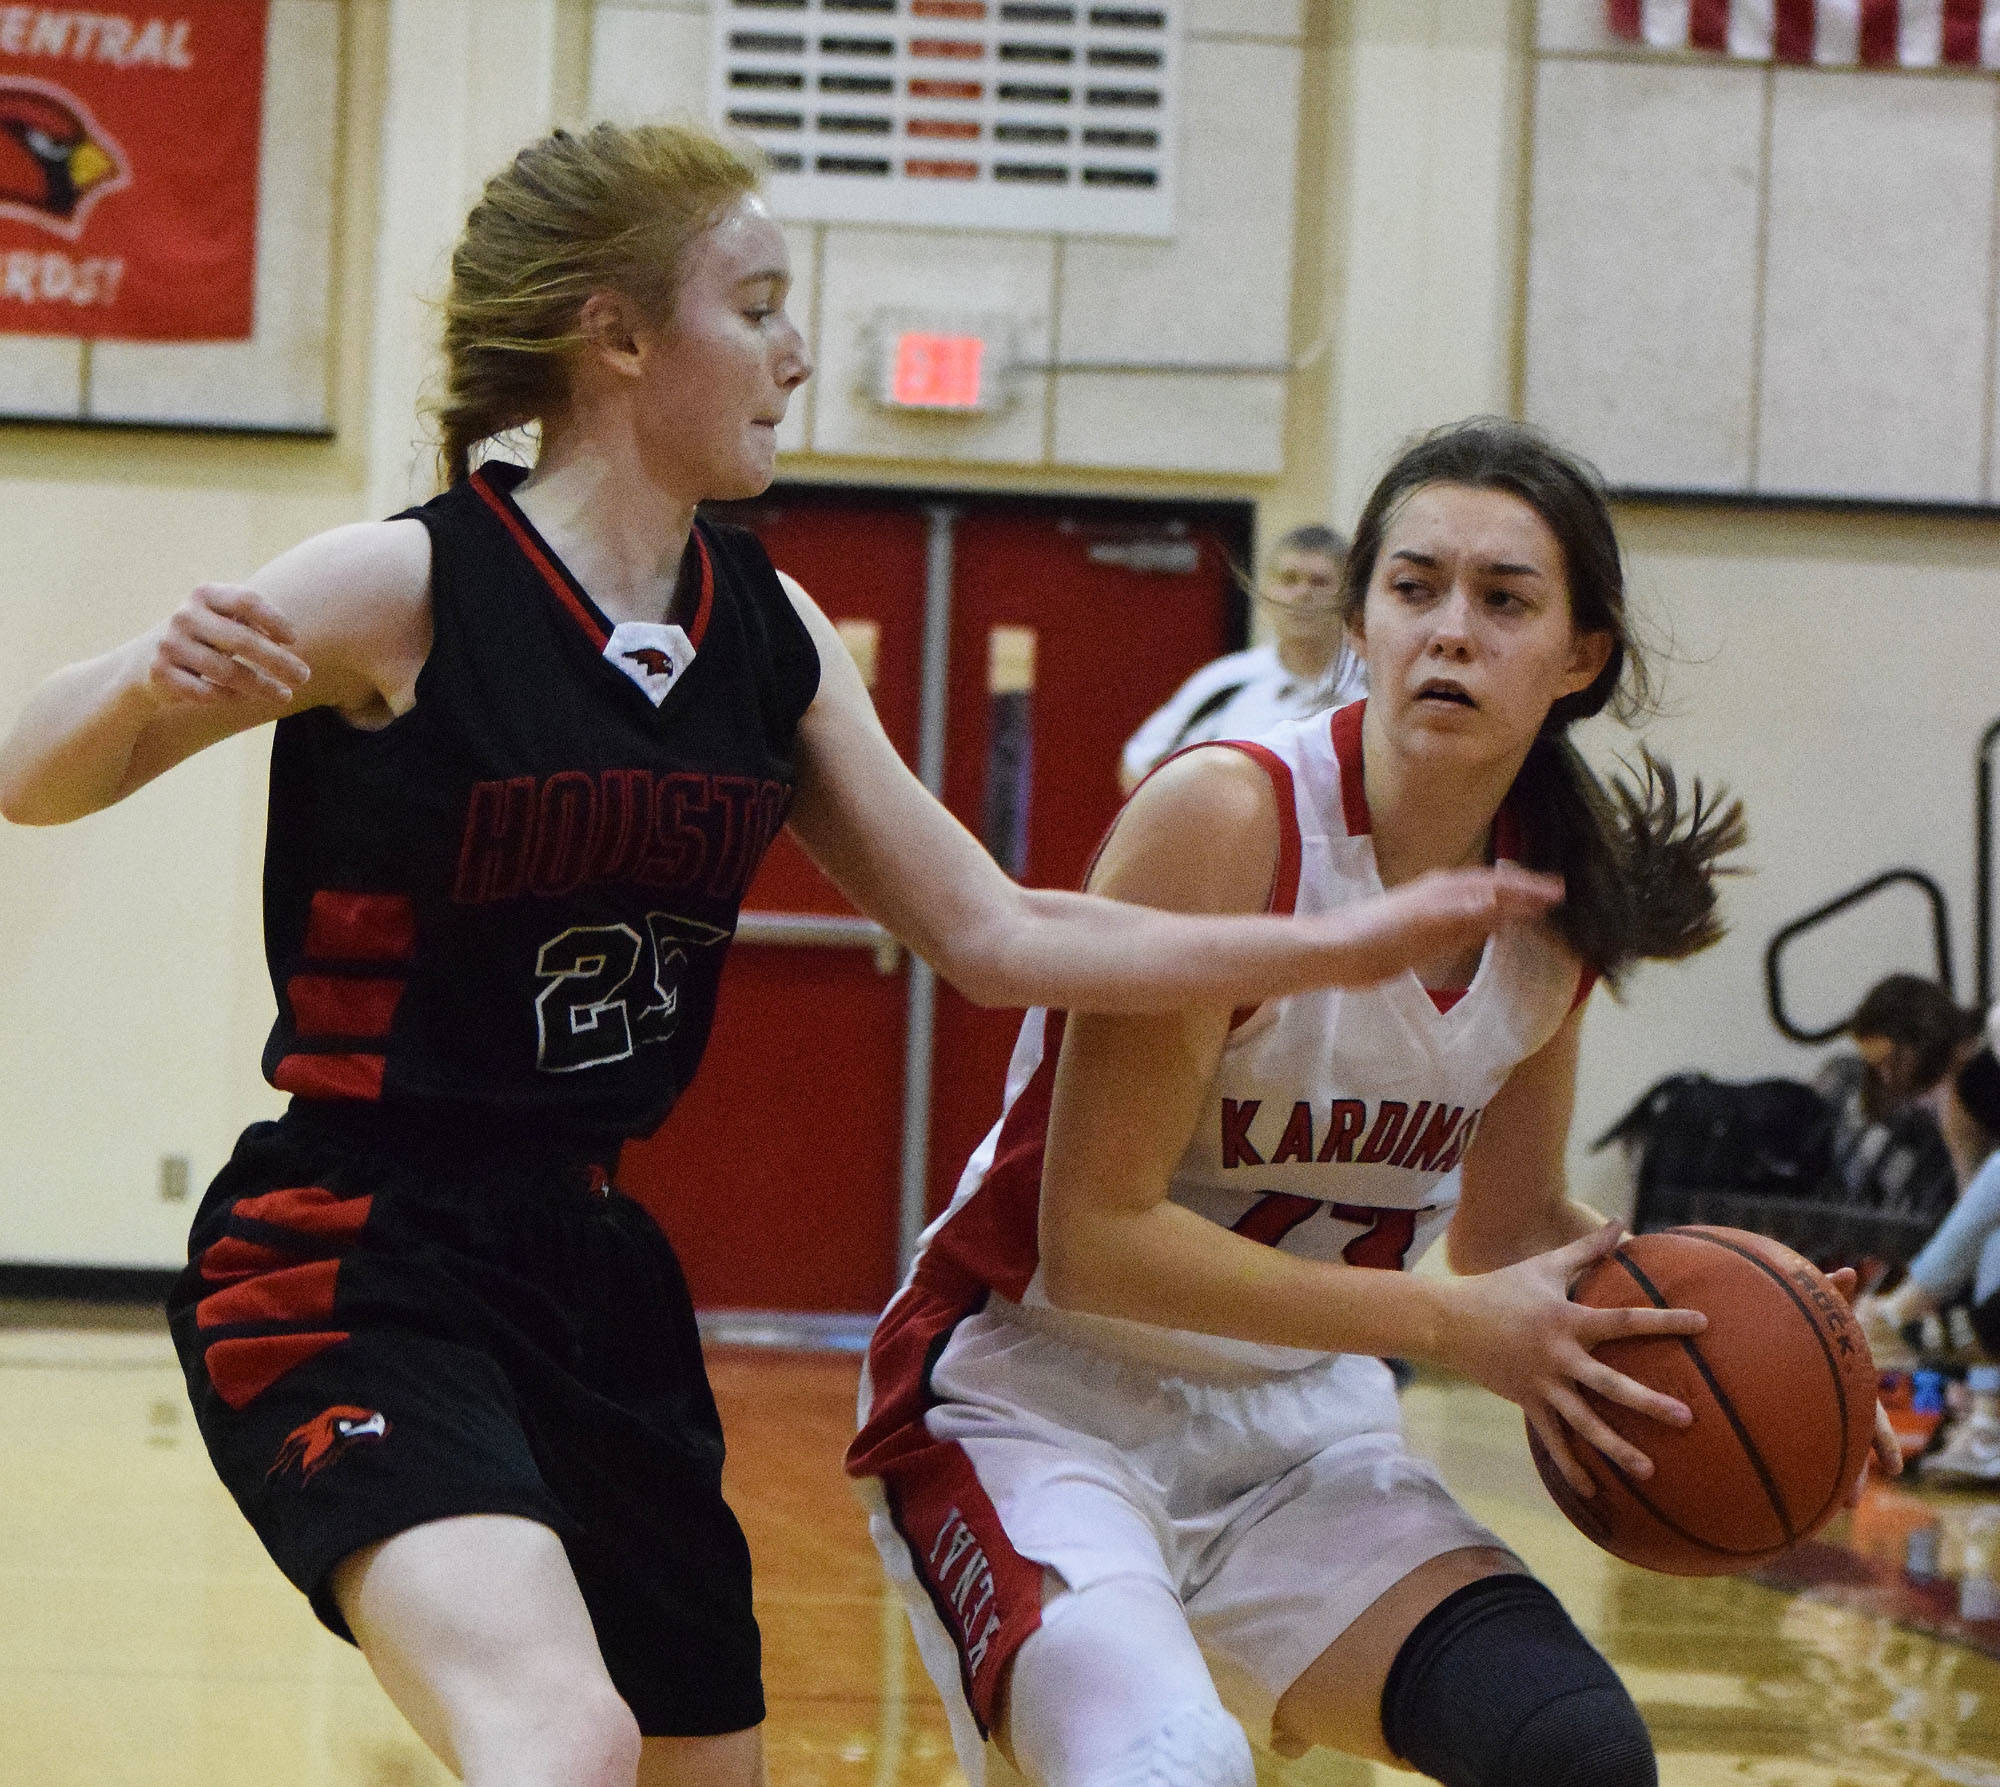 Kenai’s Logan Satathite dribbles to the arc against Houston’s Katie Ritchie Saturday afternoon at Kenai Central High School. (Photo by Joey Klecka/Peninsula Clarion)